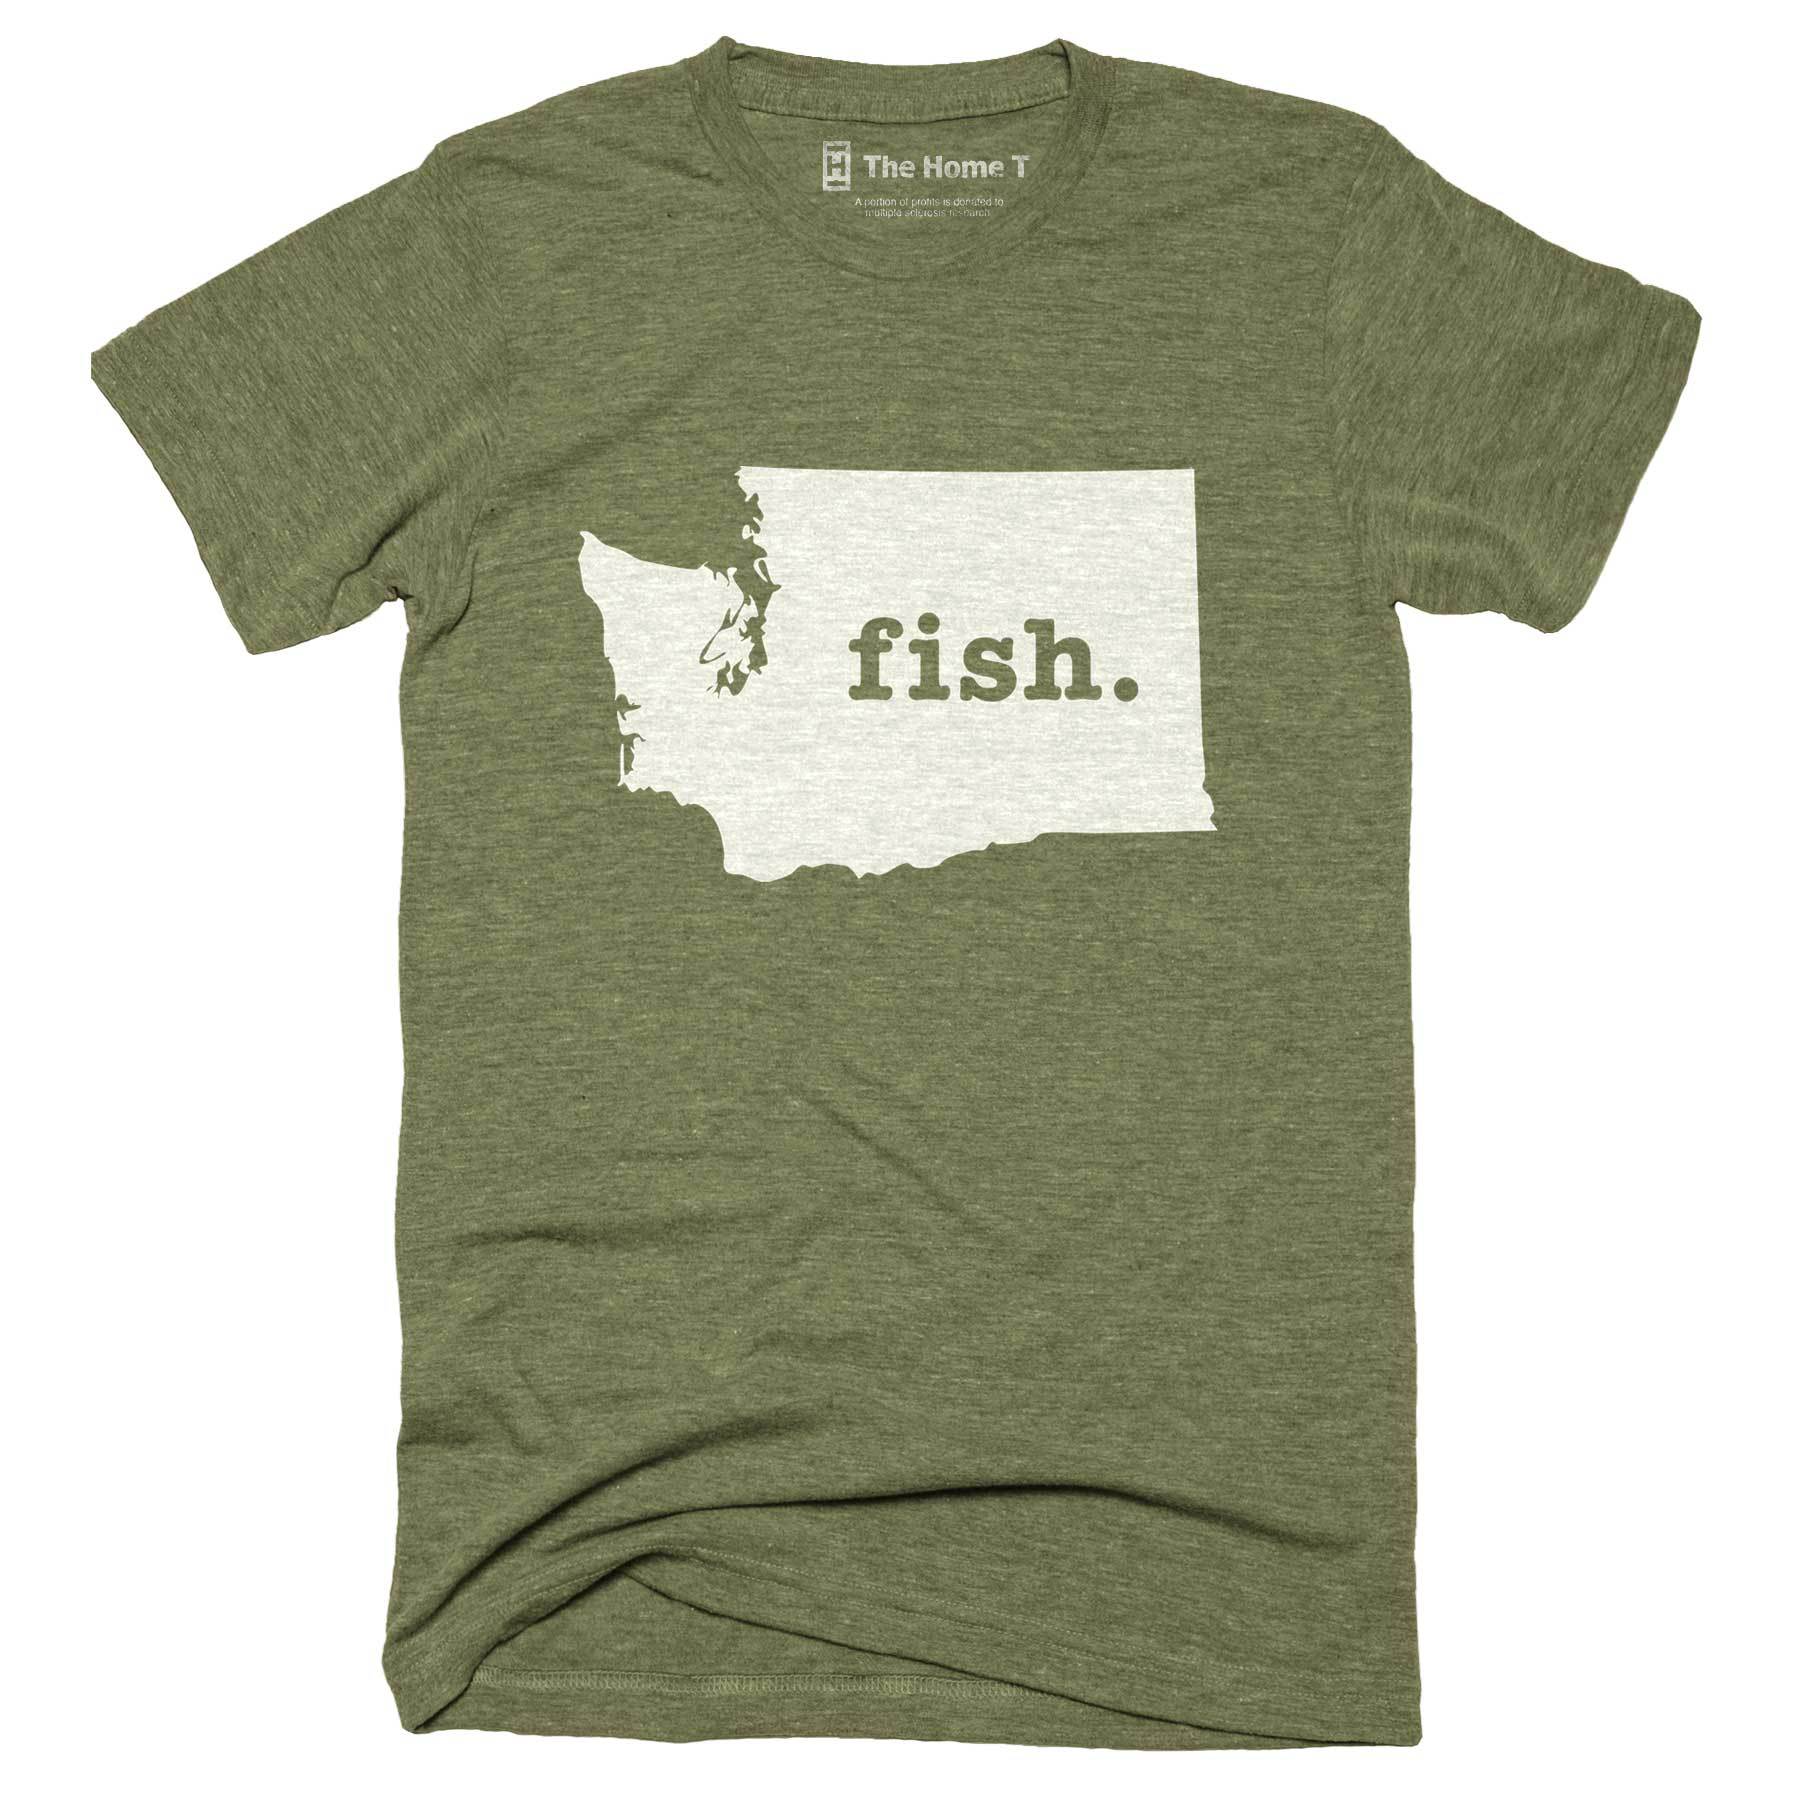 Washington Fish Home T-Shirt Outdoor Collection The Home T XXL Army Green